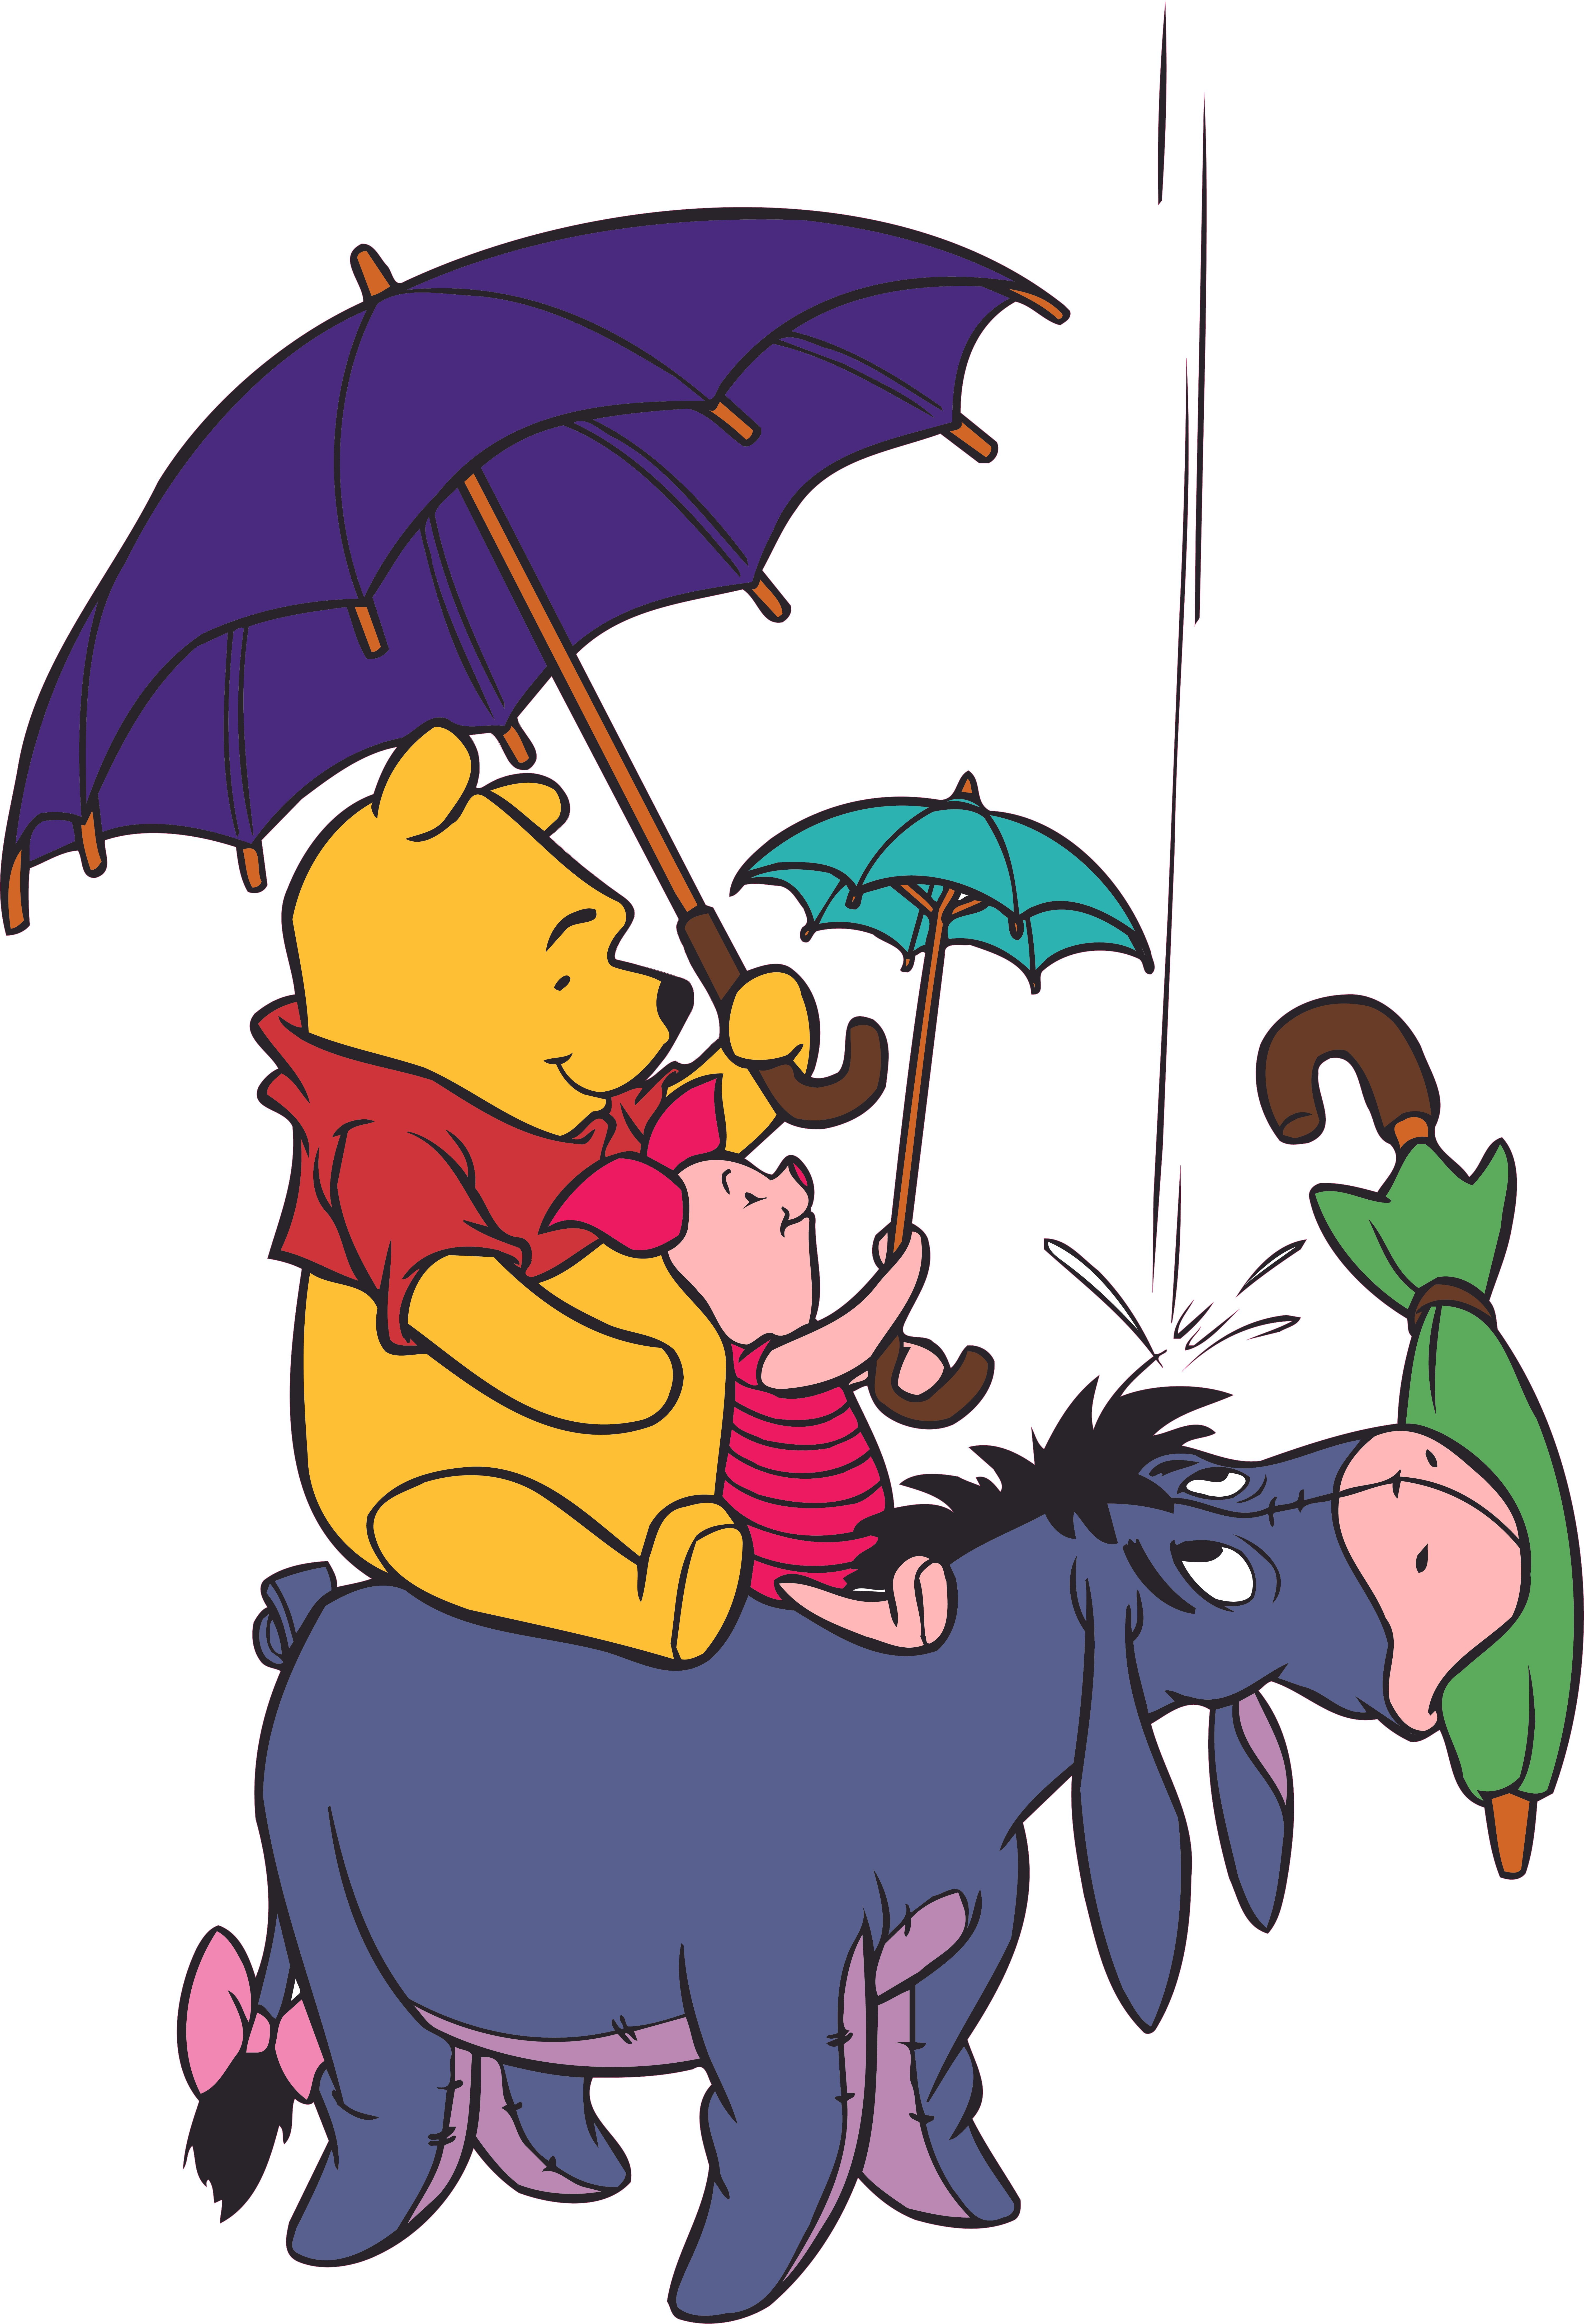 Tigger Winnie the Pooh and Friends Decal Eeyore Piglet Car Decal Vinyl Sticker Winnie the Pooh poking his tongue out